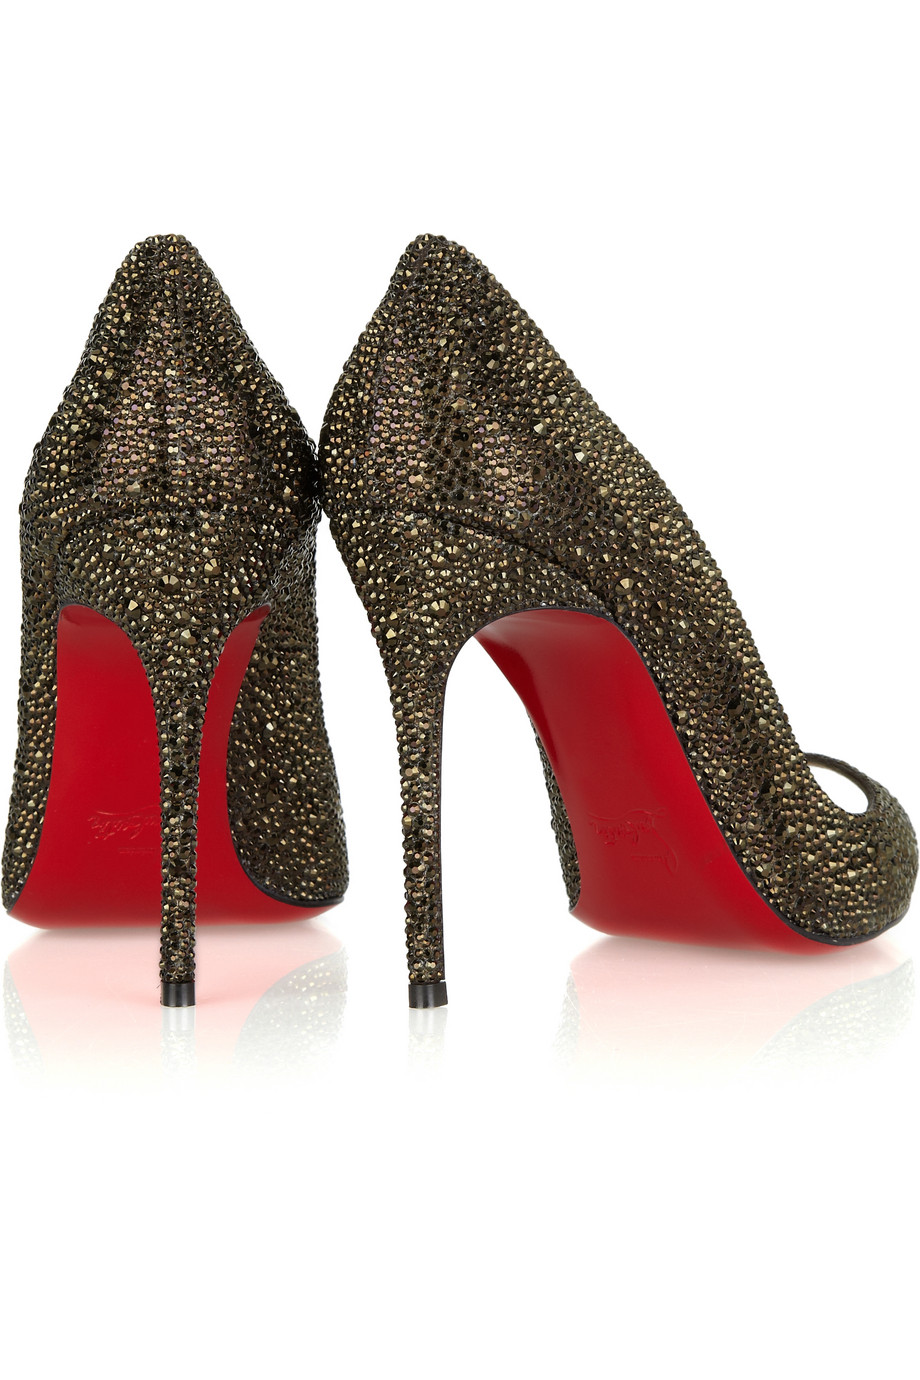 strass louboutin shoes